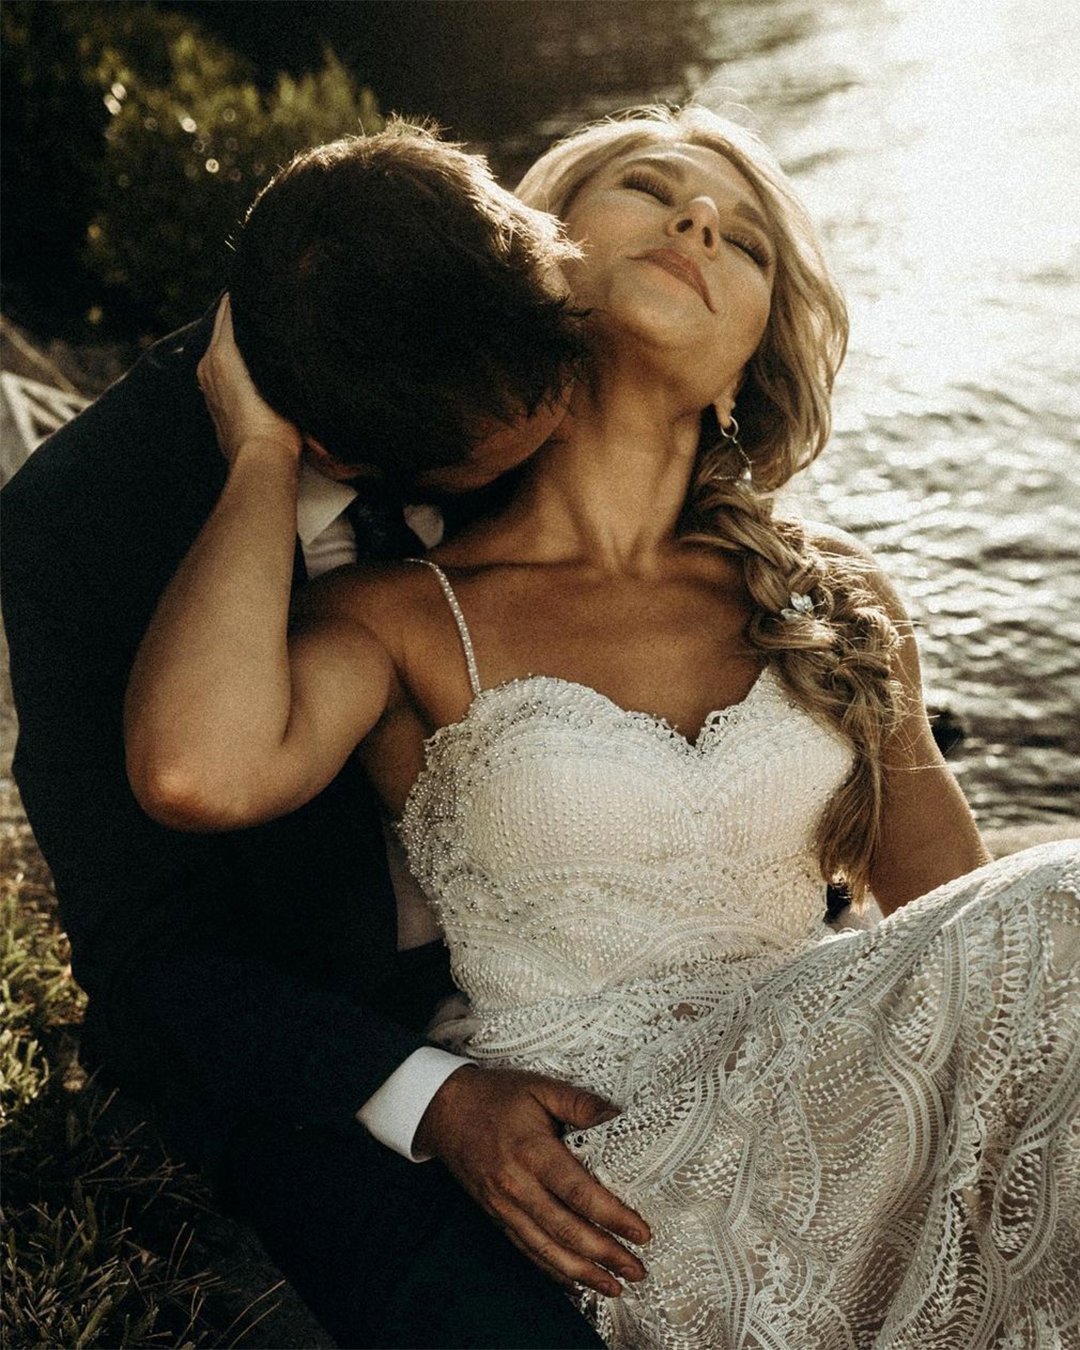 wedding poses kiss on the shoulder ideas